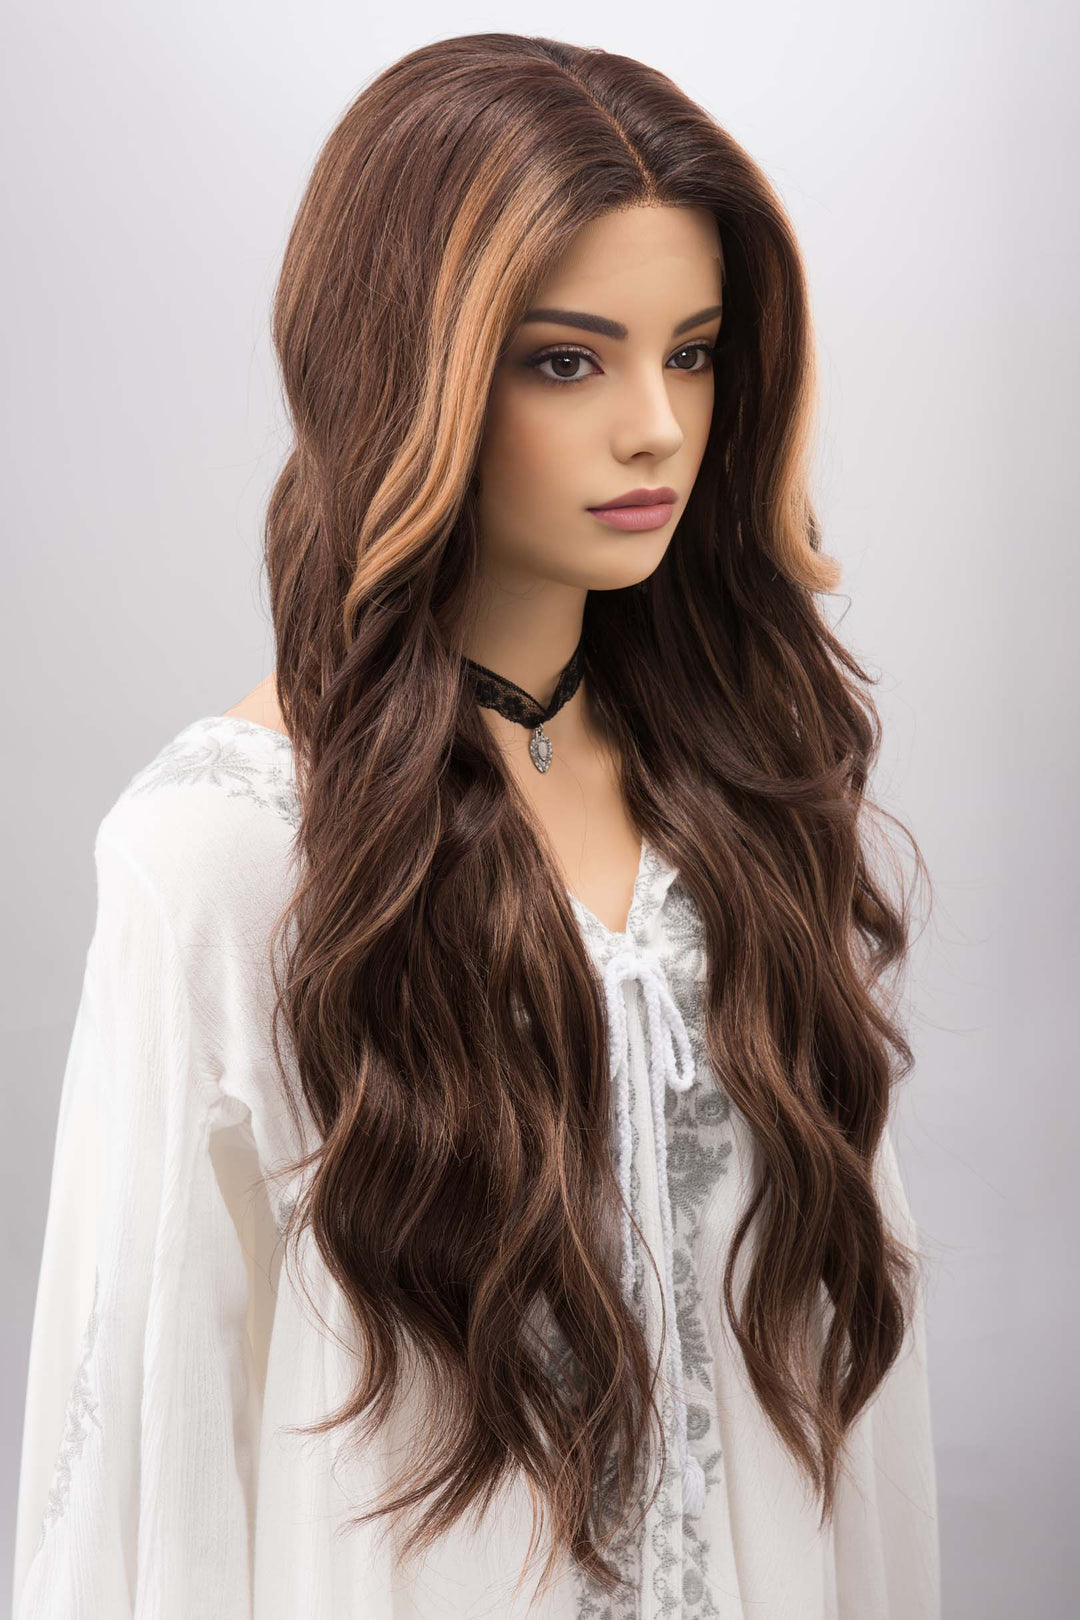 Brunette Lace Front Wig with Blonde Highlight Side Bangs Kyra